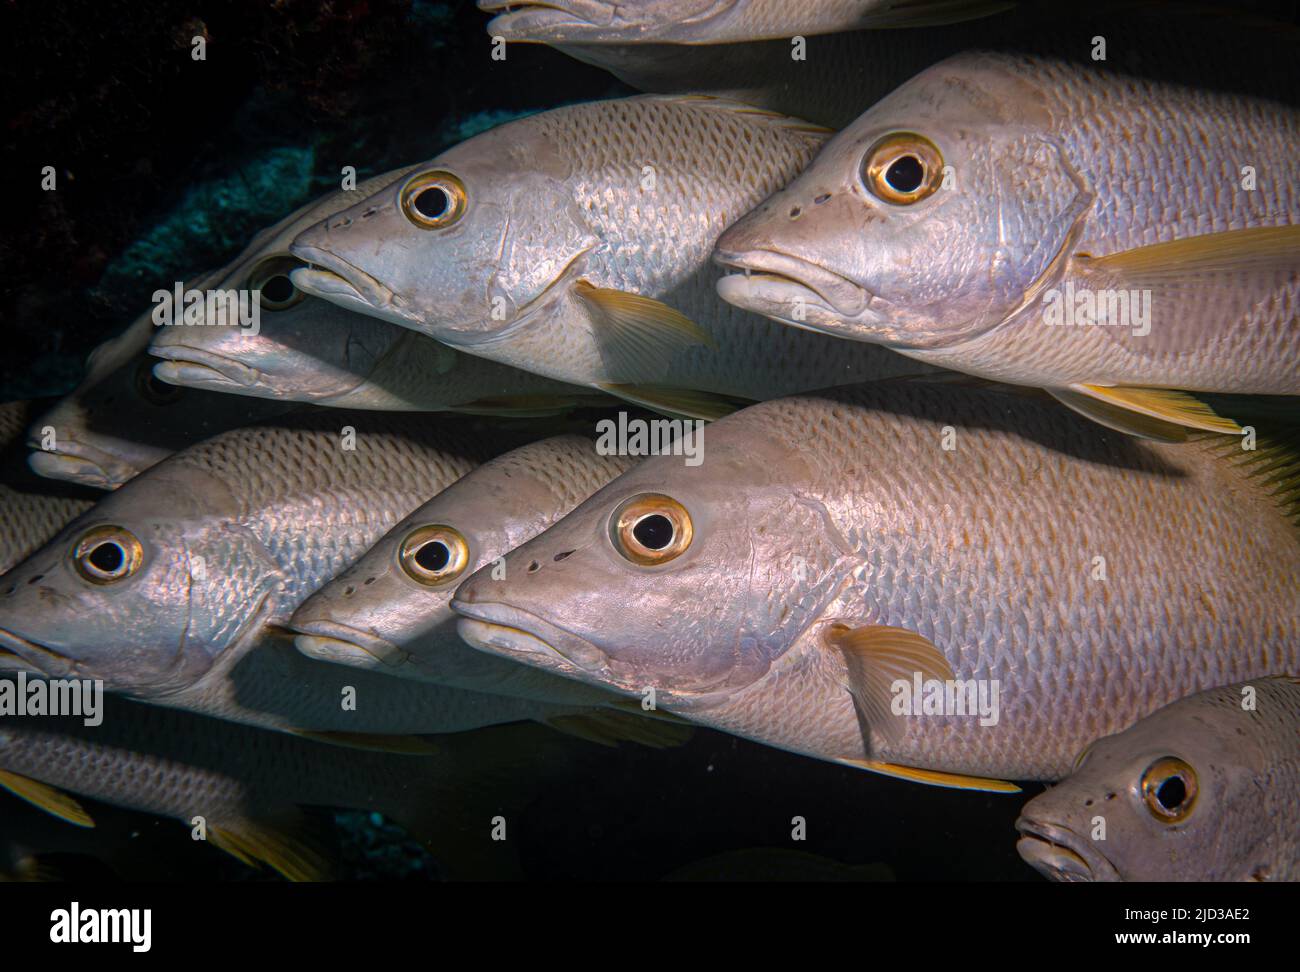 Schooling Schoolmaster snappers (Lutjanus apodus) on the Thunderdome divesite, off the island of Provodenciales, Turks and Caicos Islands Stock Photo